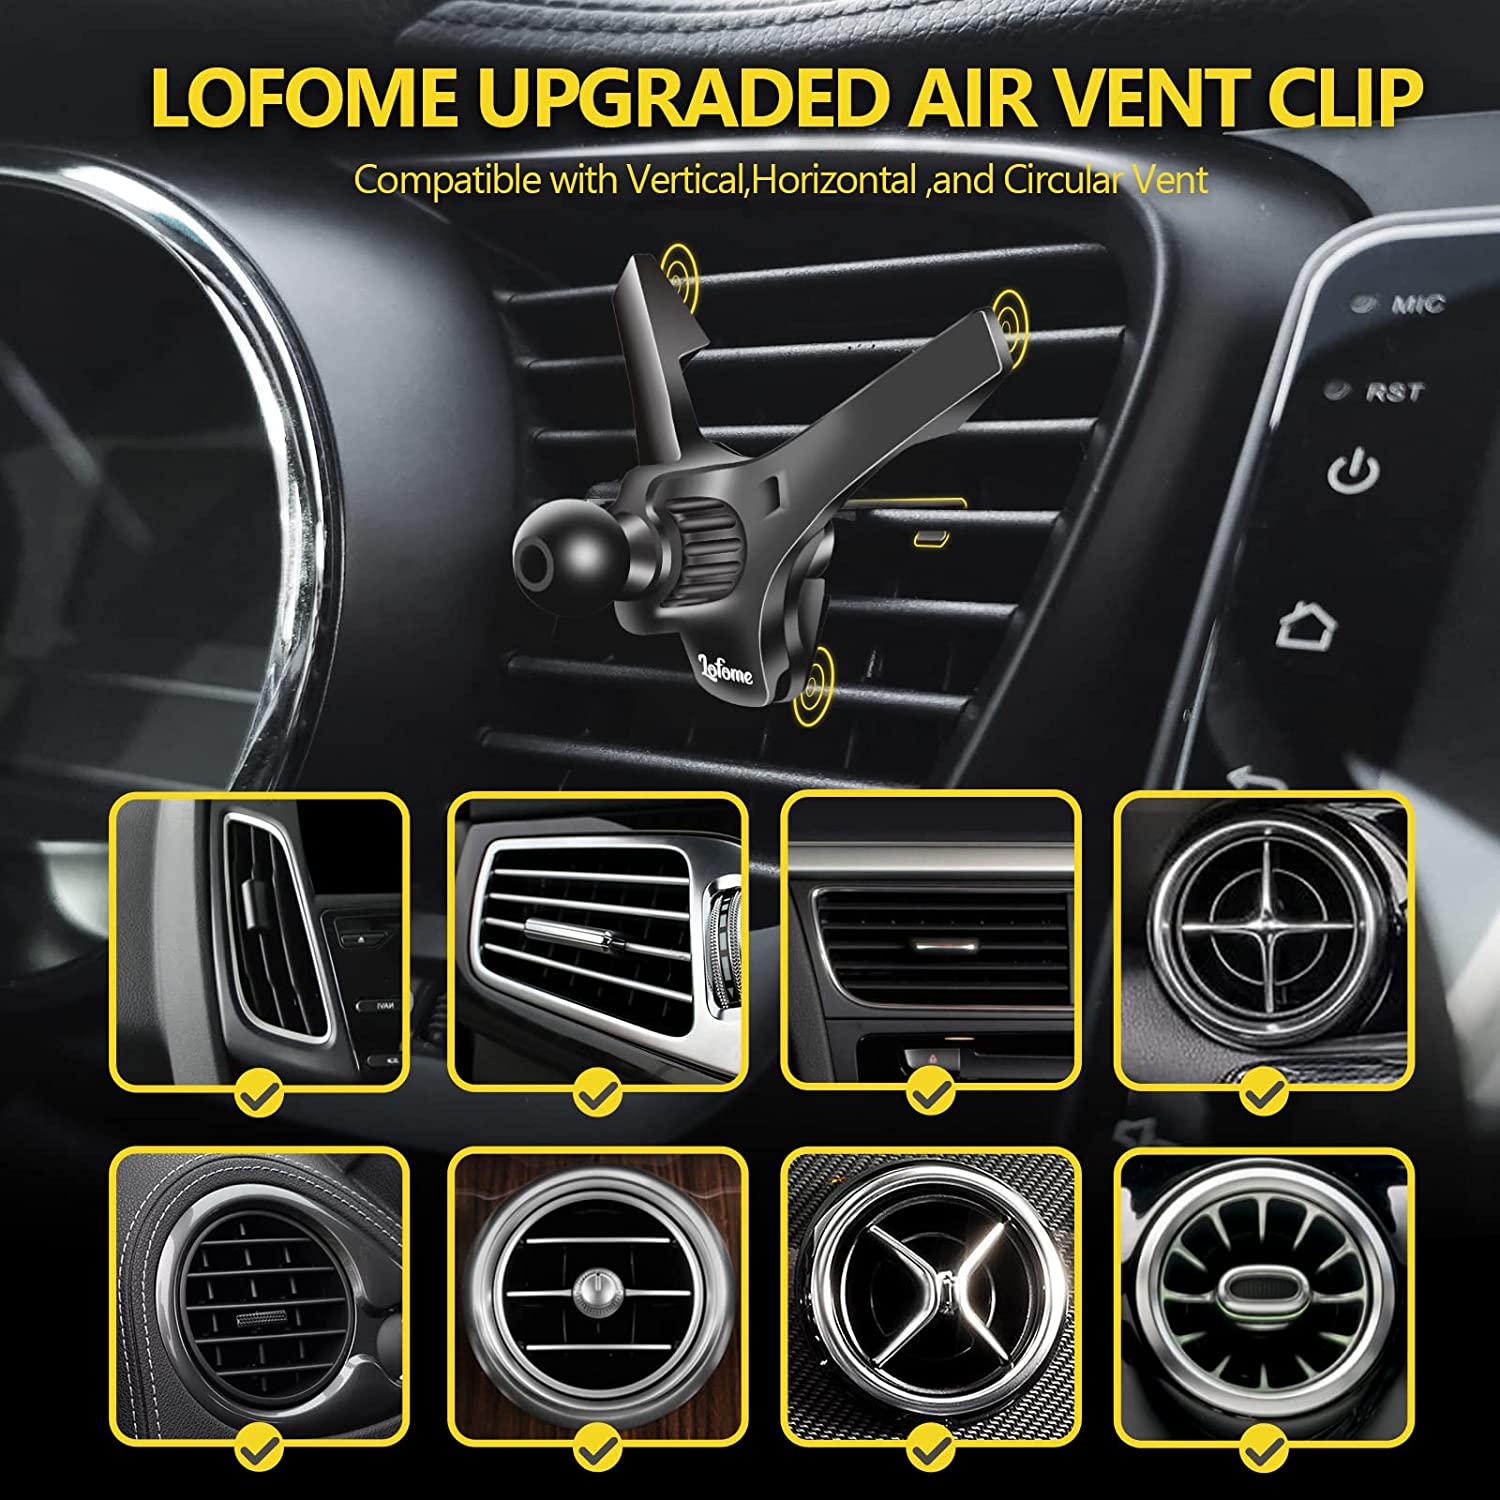 LOFOME, LOFOME Universal Air Vent Clip for Car Mount,Sturdy Vent Grip for Most Car Phone Holder&Wireless Car Charger-Only Vent Clip for Replace/Upgrad(Compatible with Joint Ball Diameter 0.67 in/17mm)